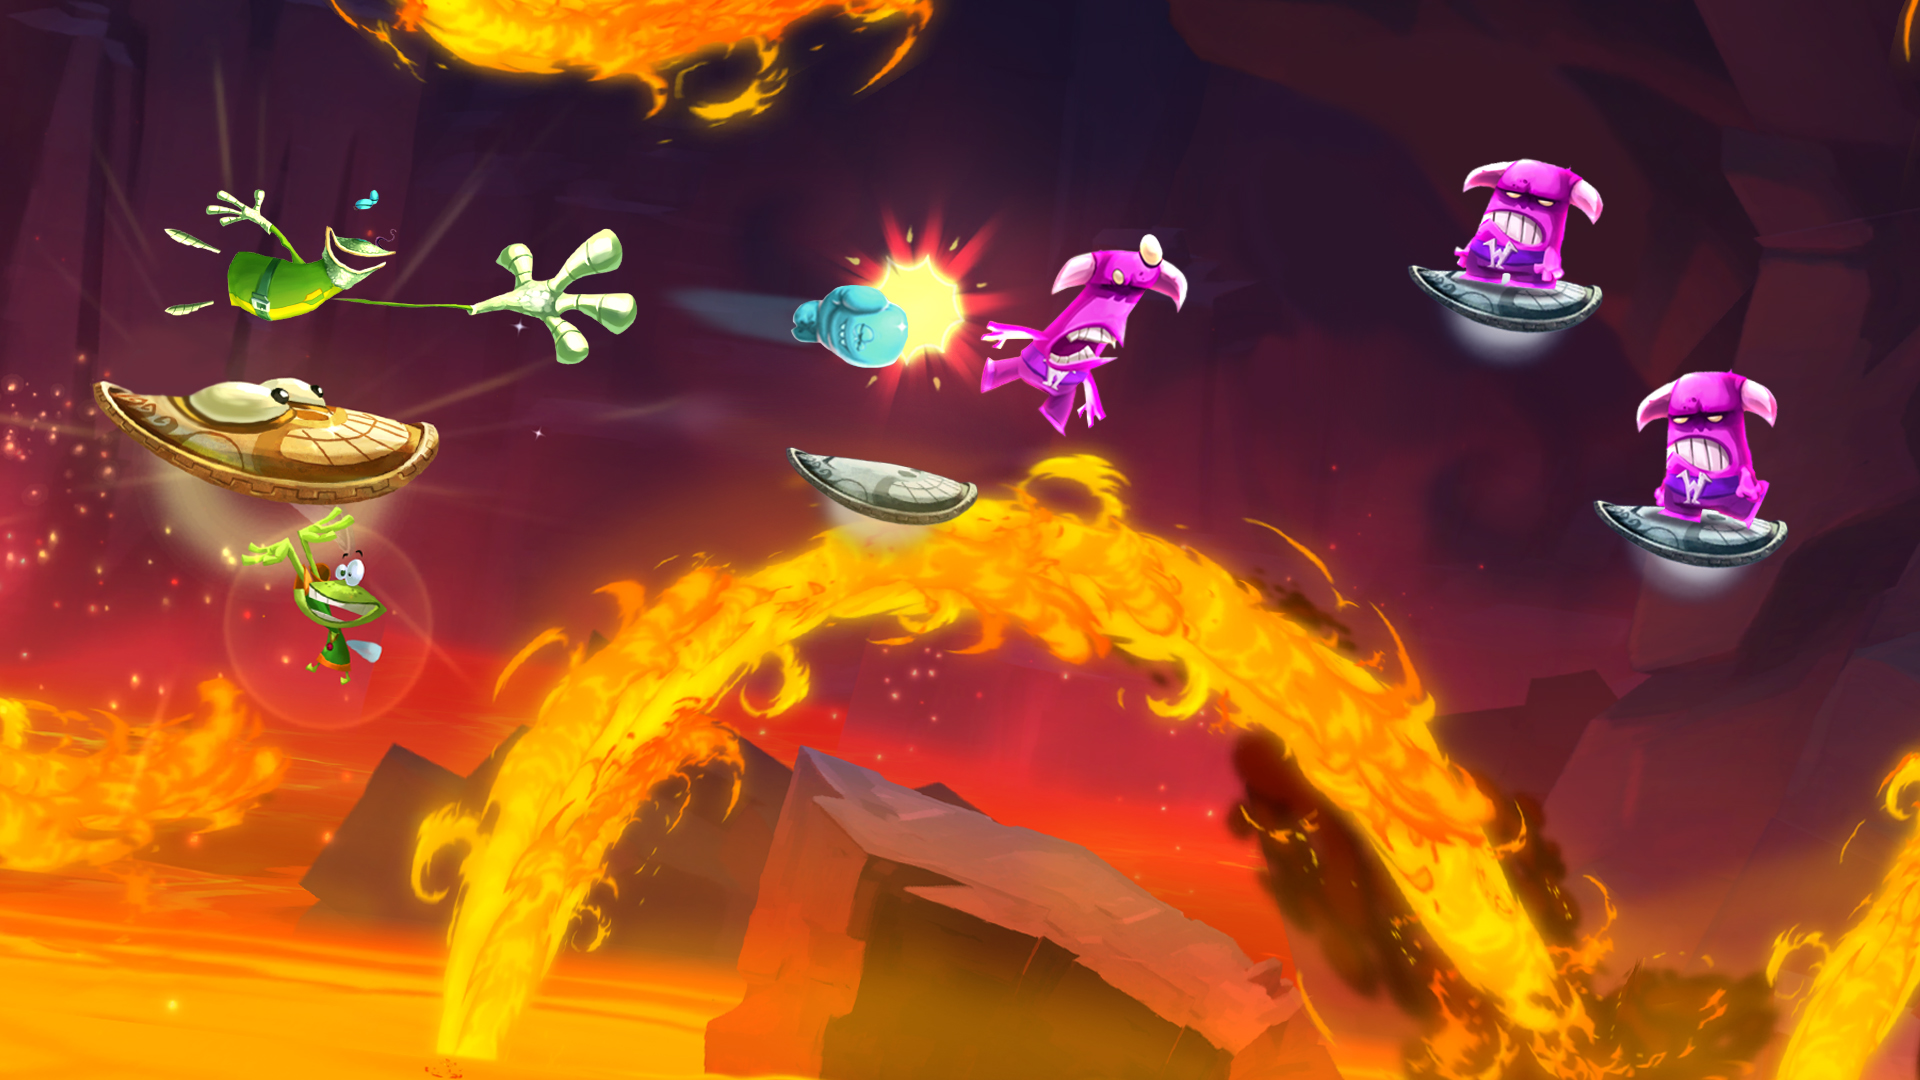 1370783864_raymanlegends_screen_olypumsmaximus_e3_130610_4h15pmpt